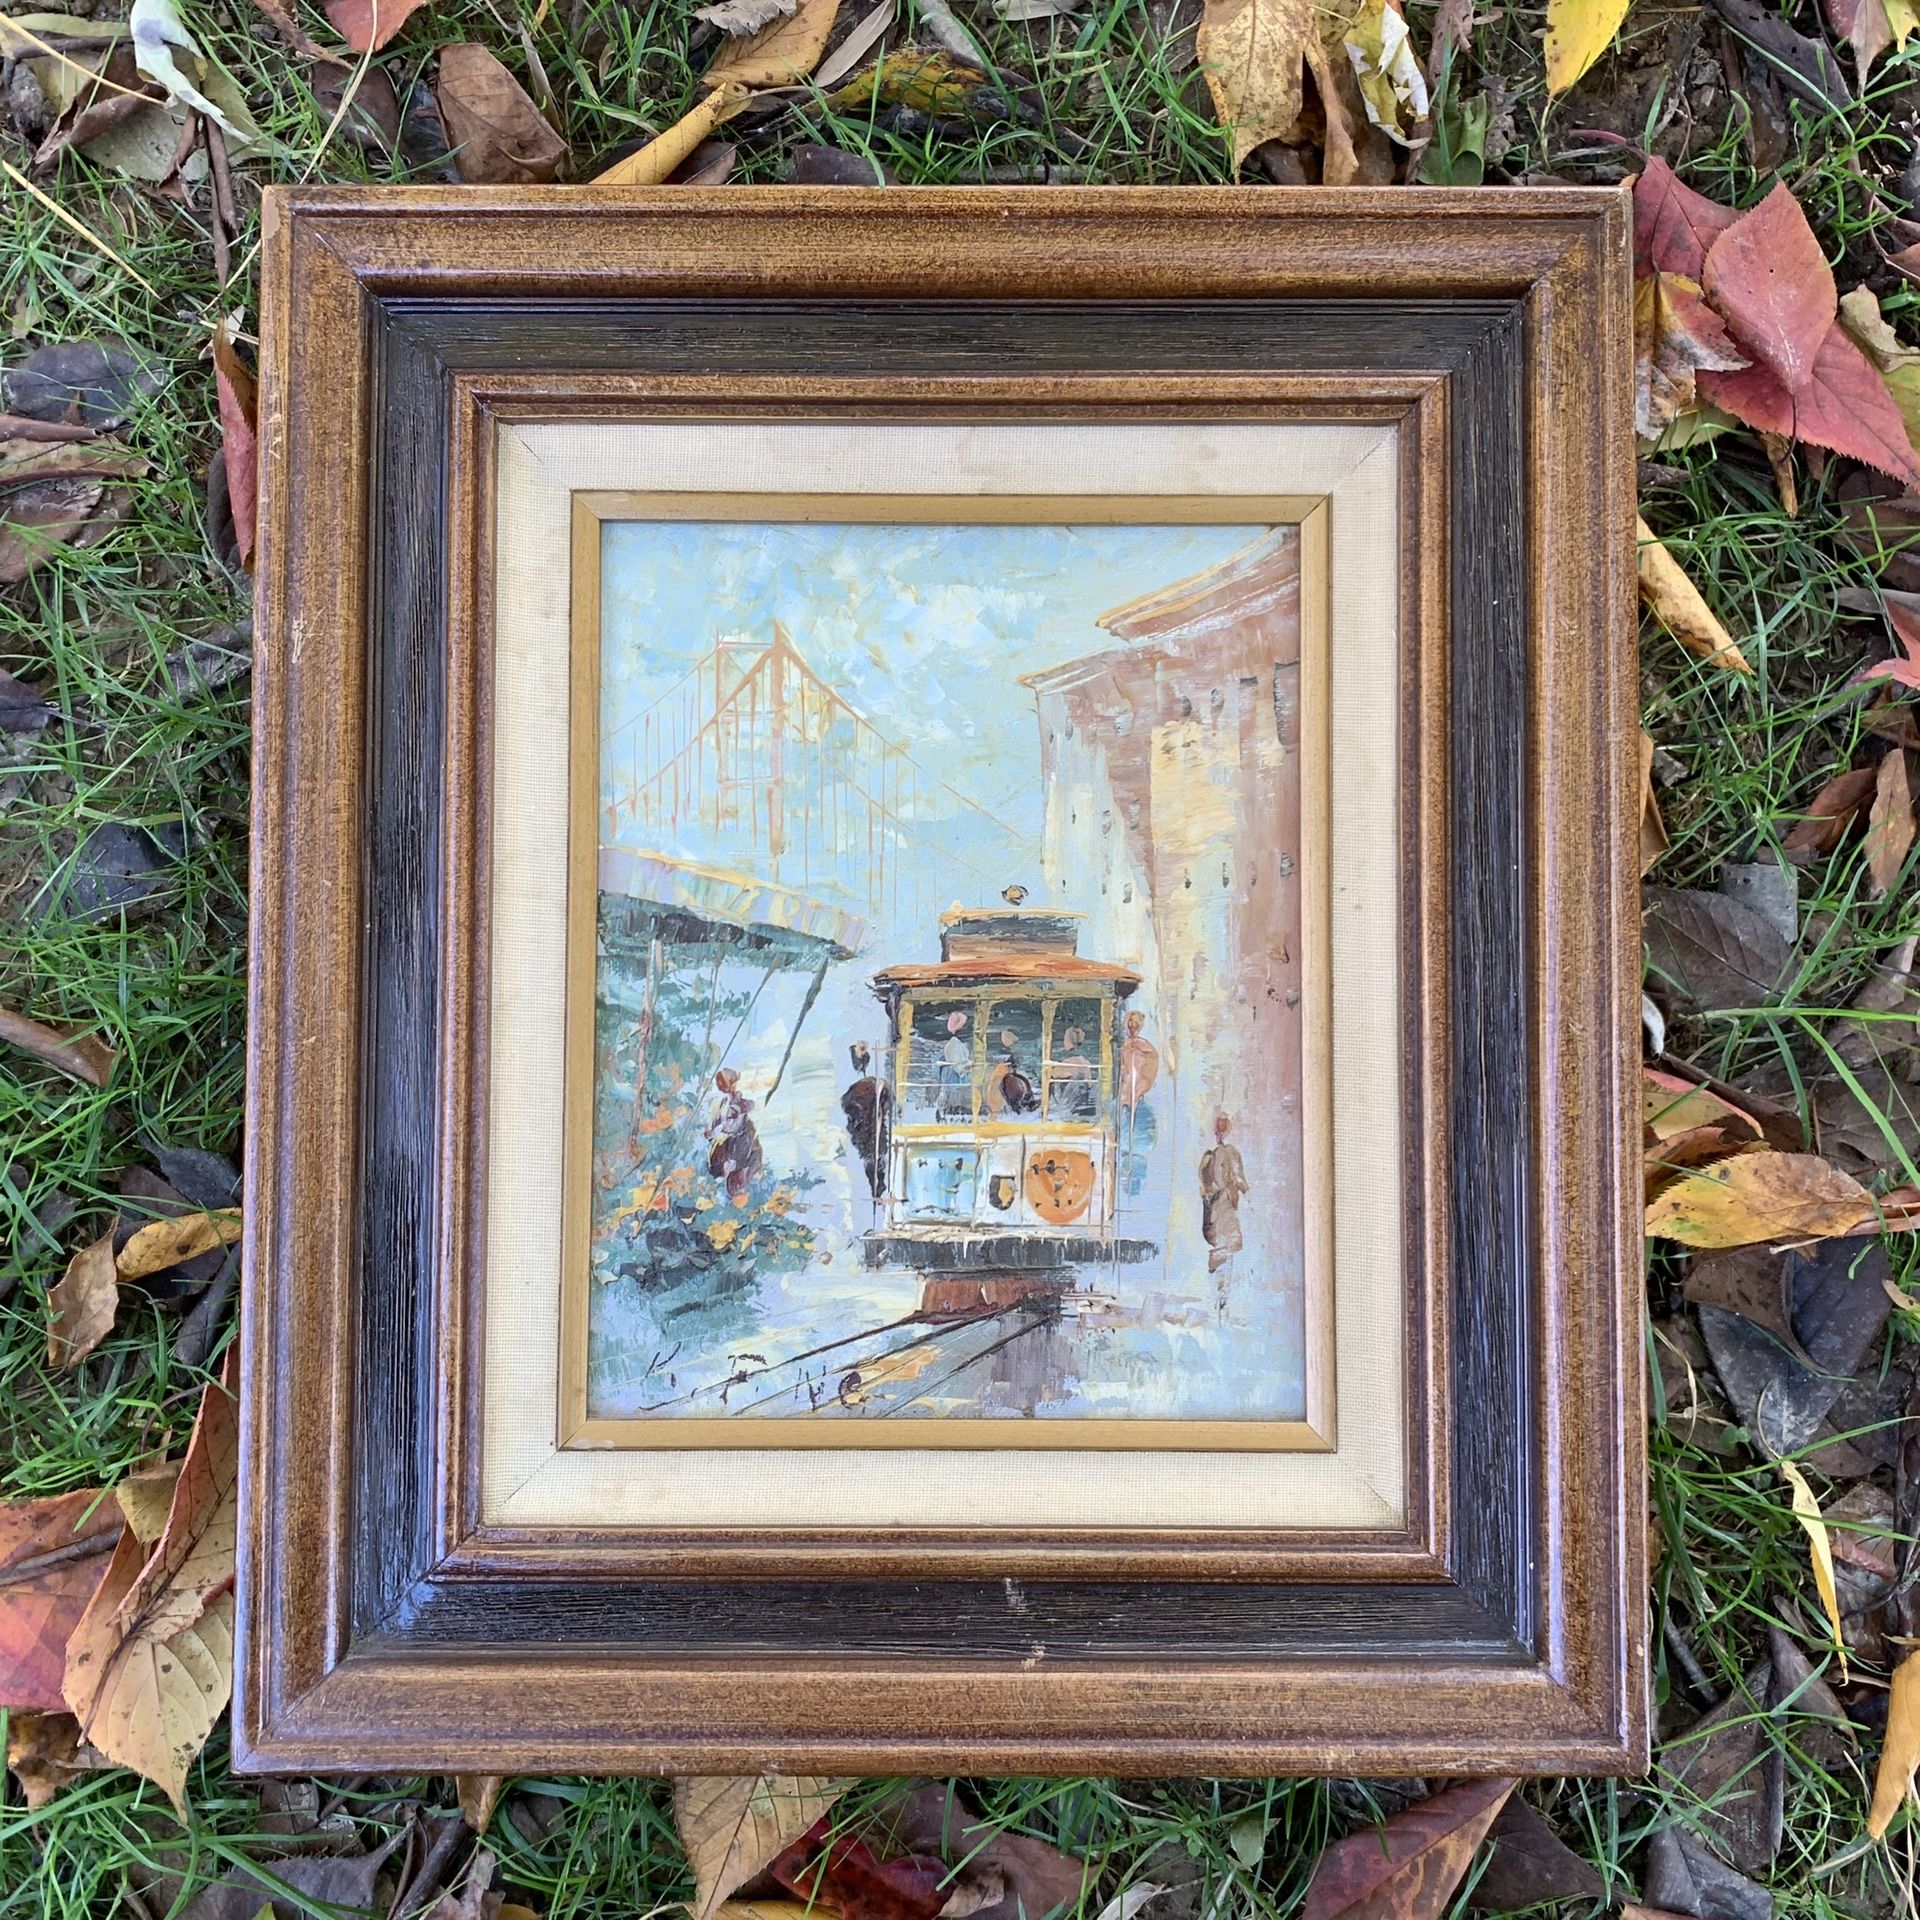 Original painting on canvas with wooden frame